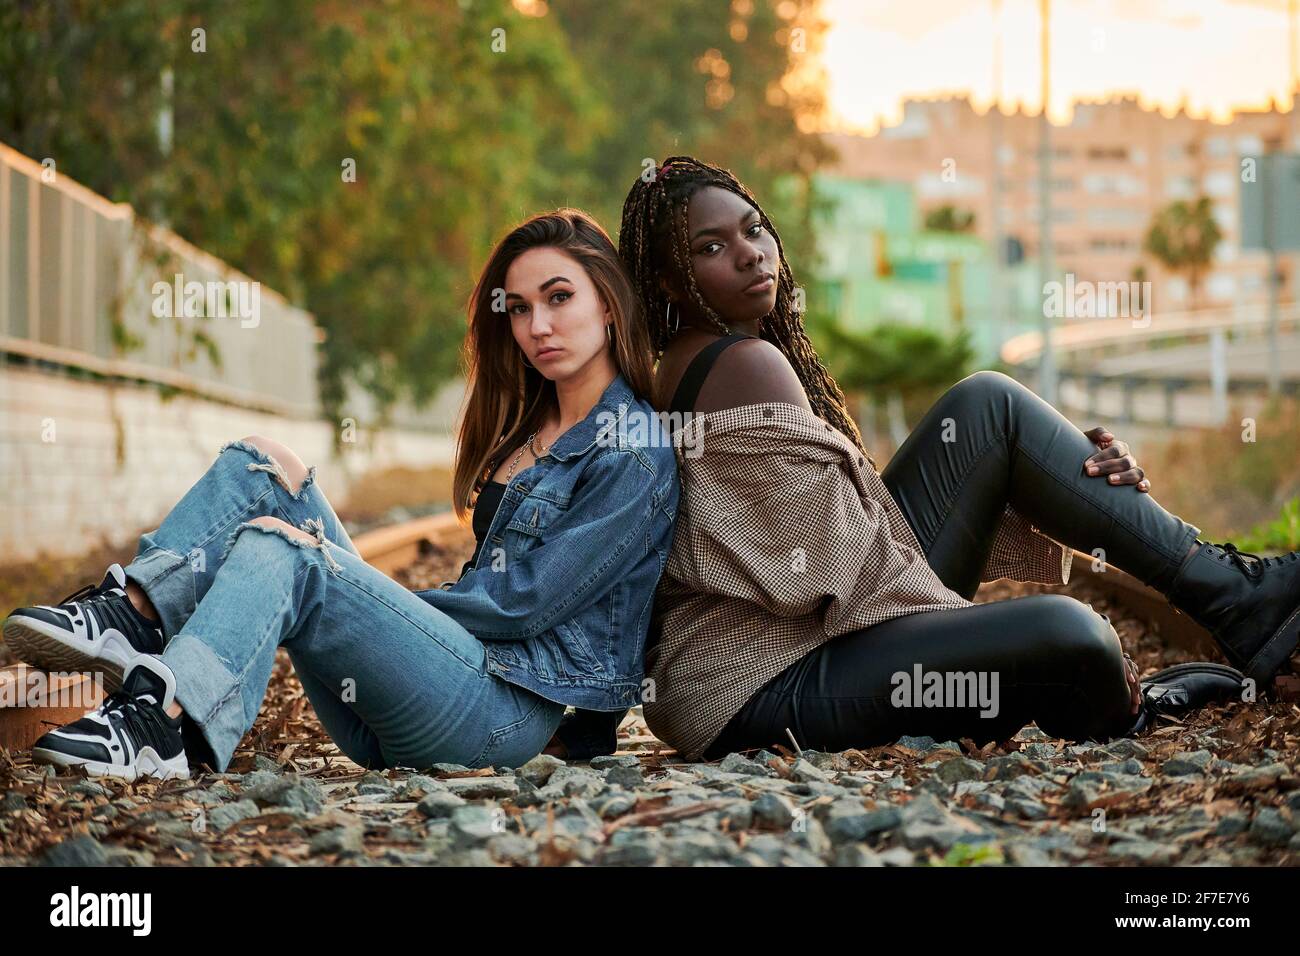 Two multiethnic young women pose and look at the camera at sunset Stock Photo